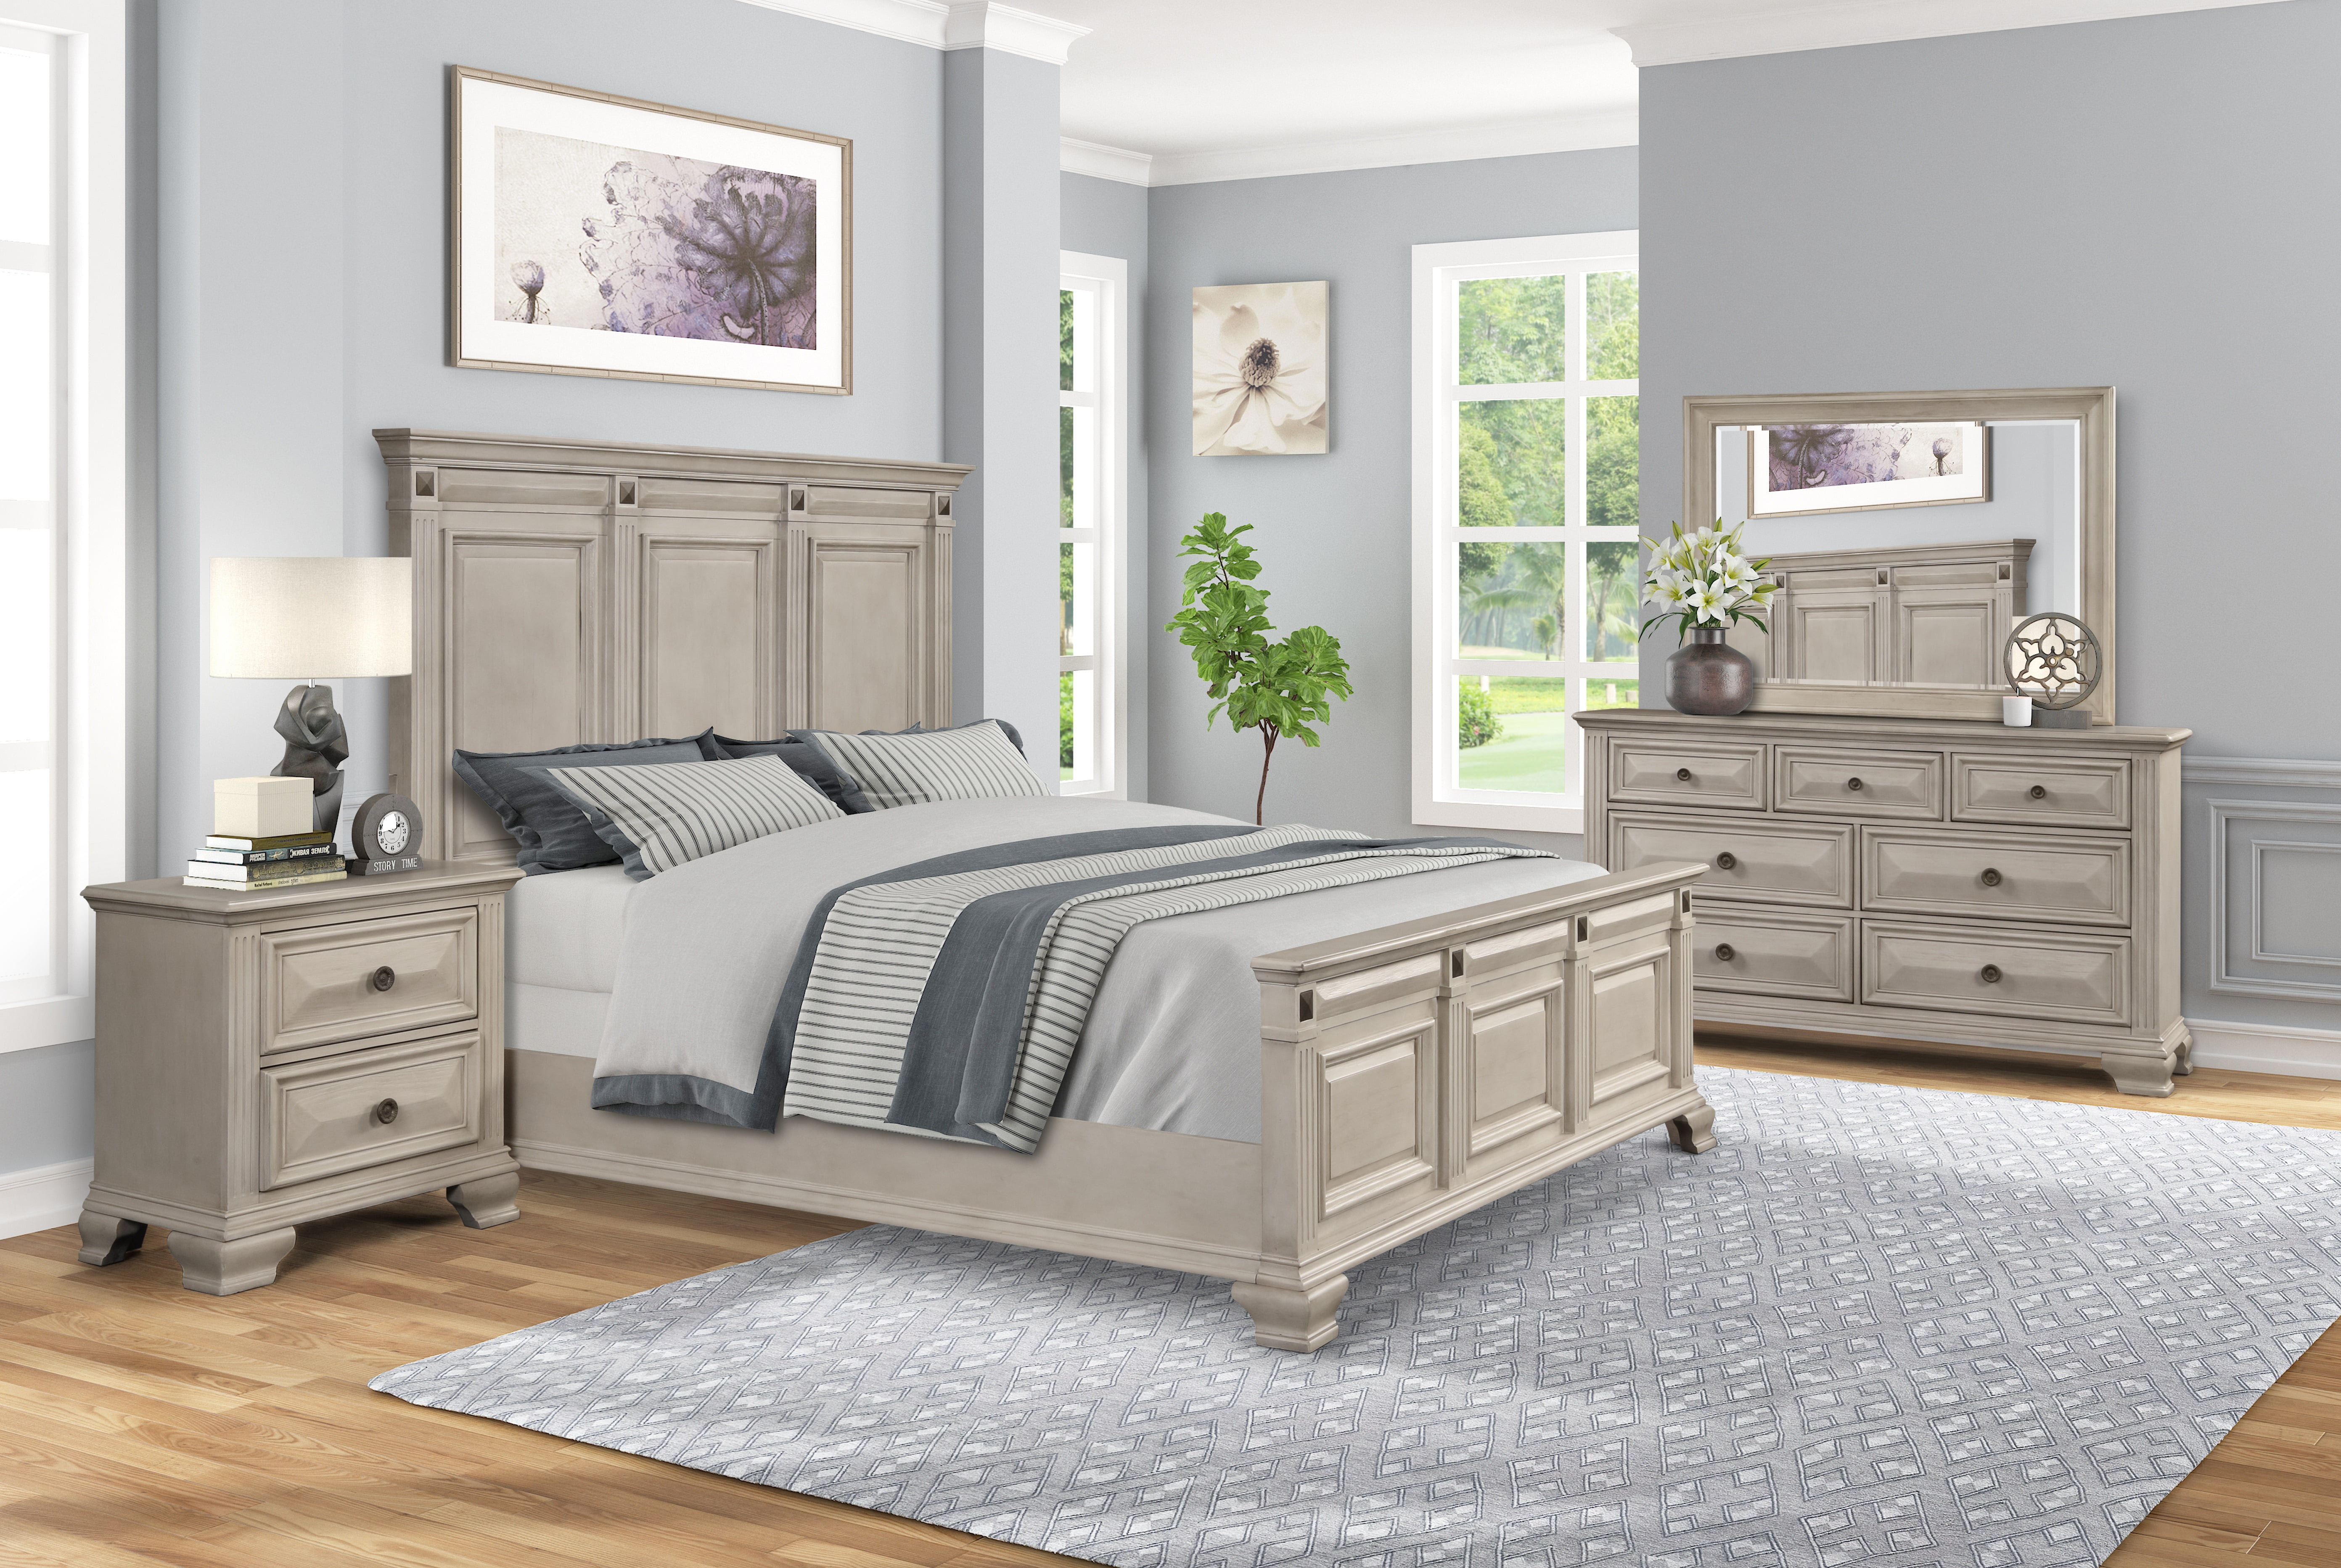 ready made up bedroom furniture